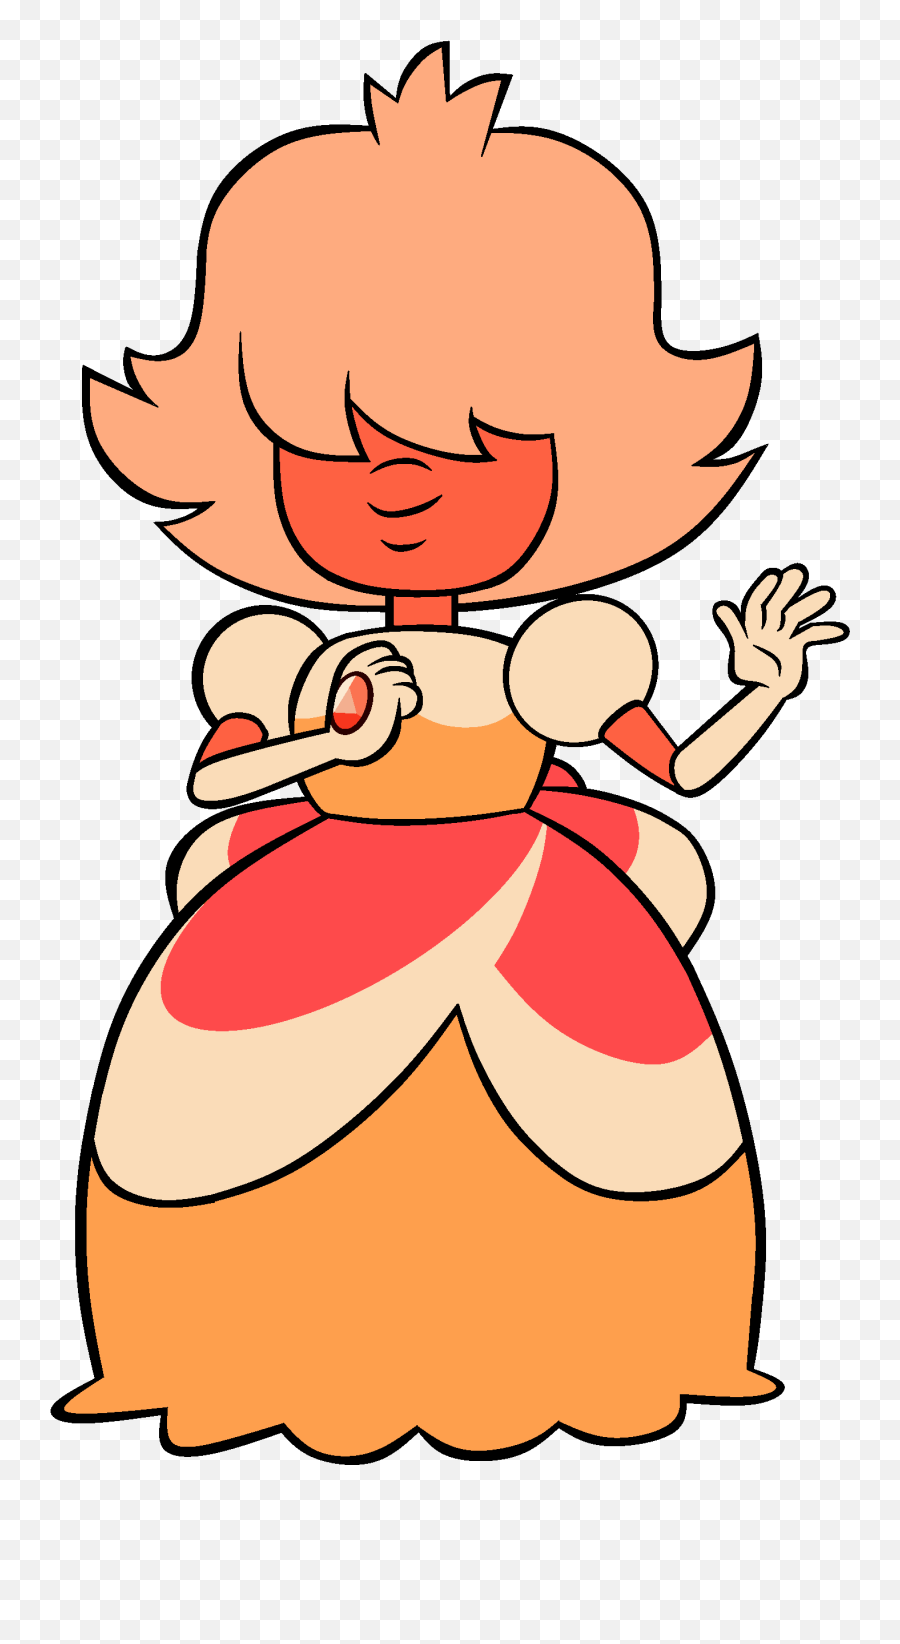 Padparadscha - Steven Universe Off Colors Padparadscha Emoji,Wikia Images Rendering Huge On Mediawiki Emoticons